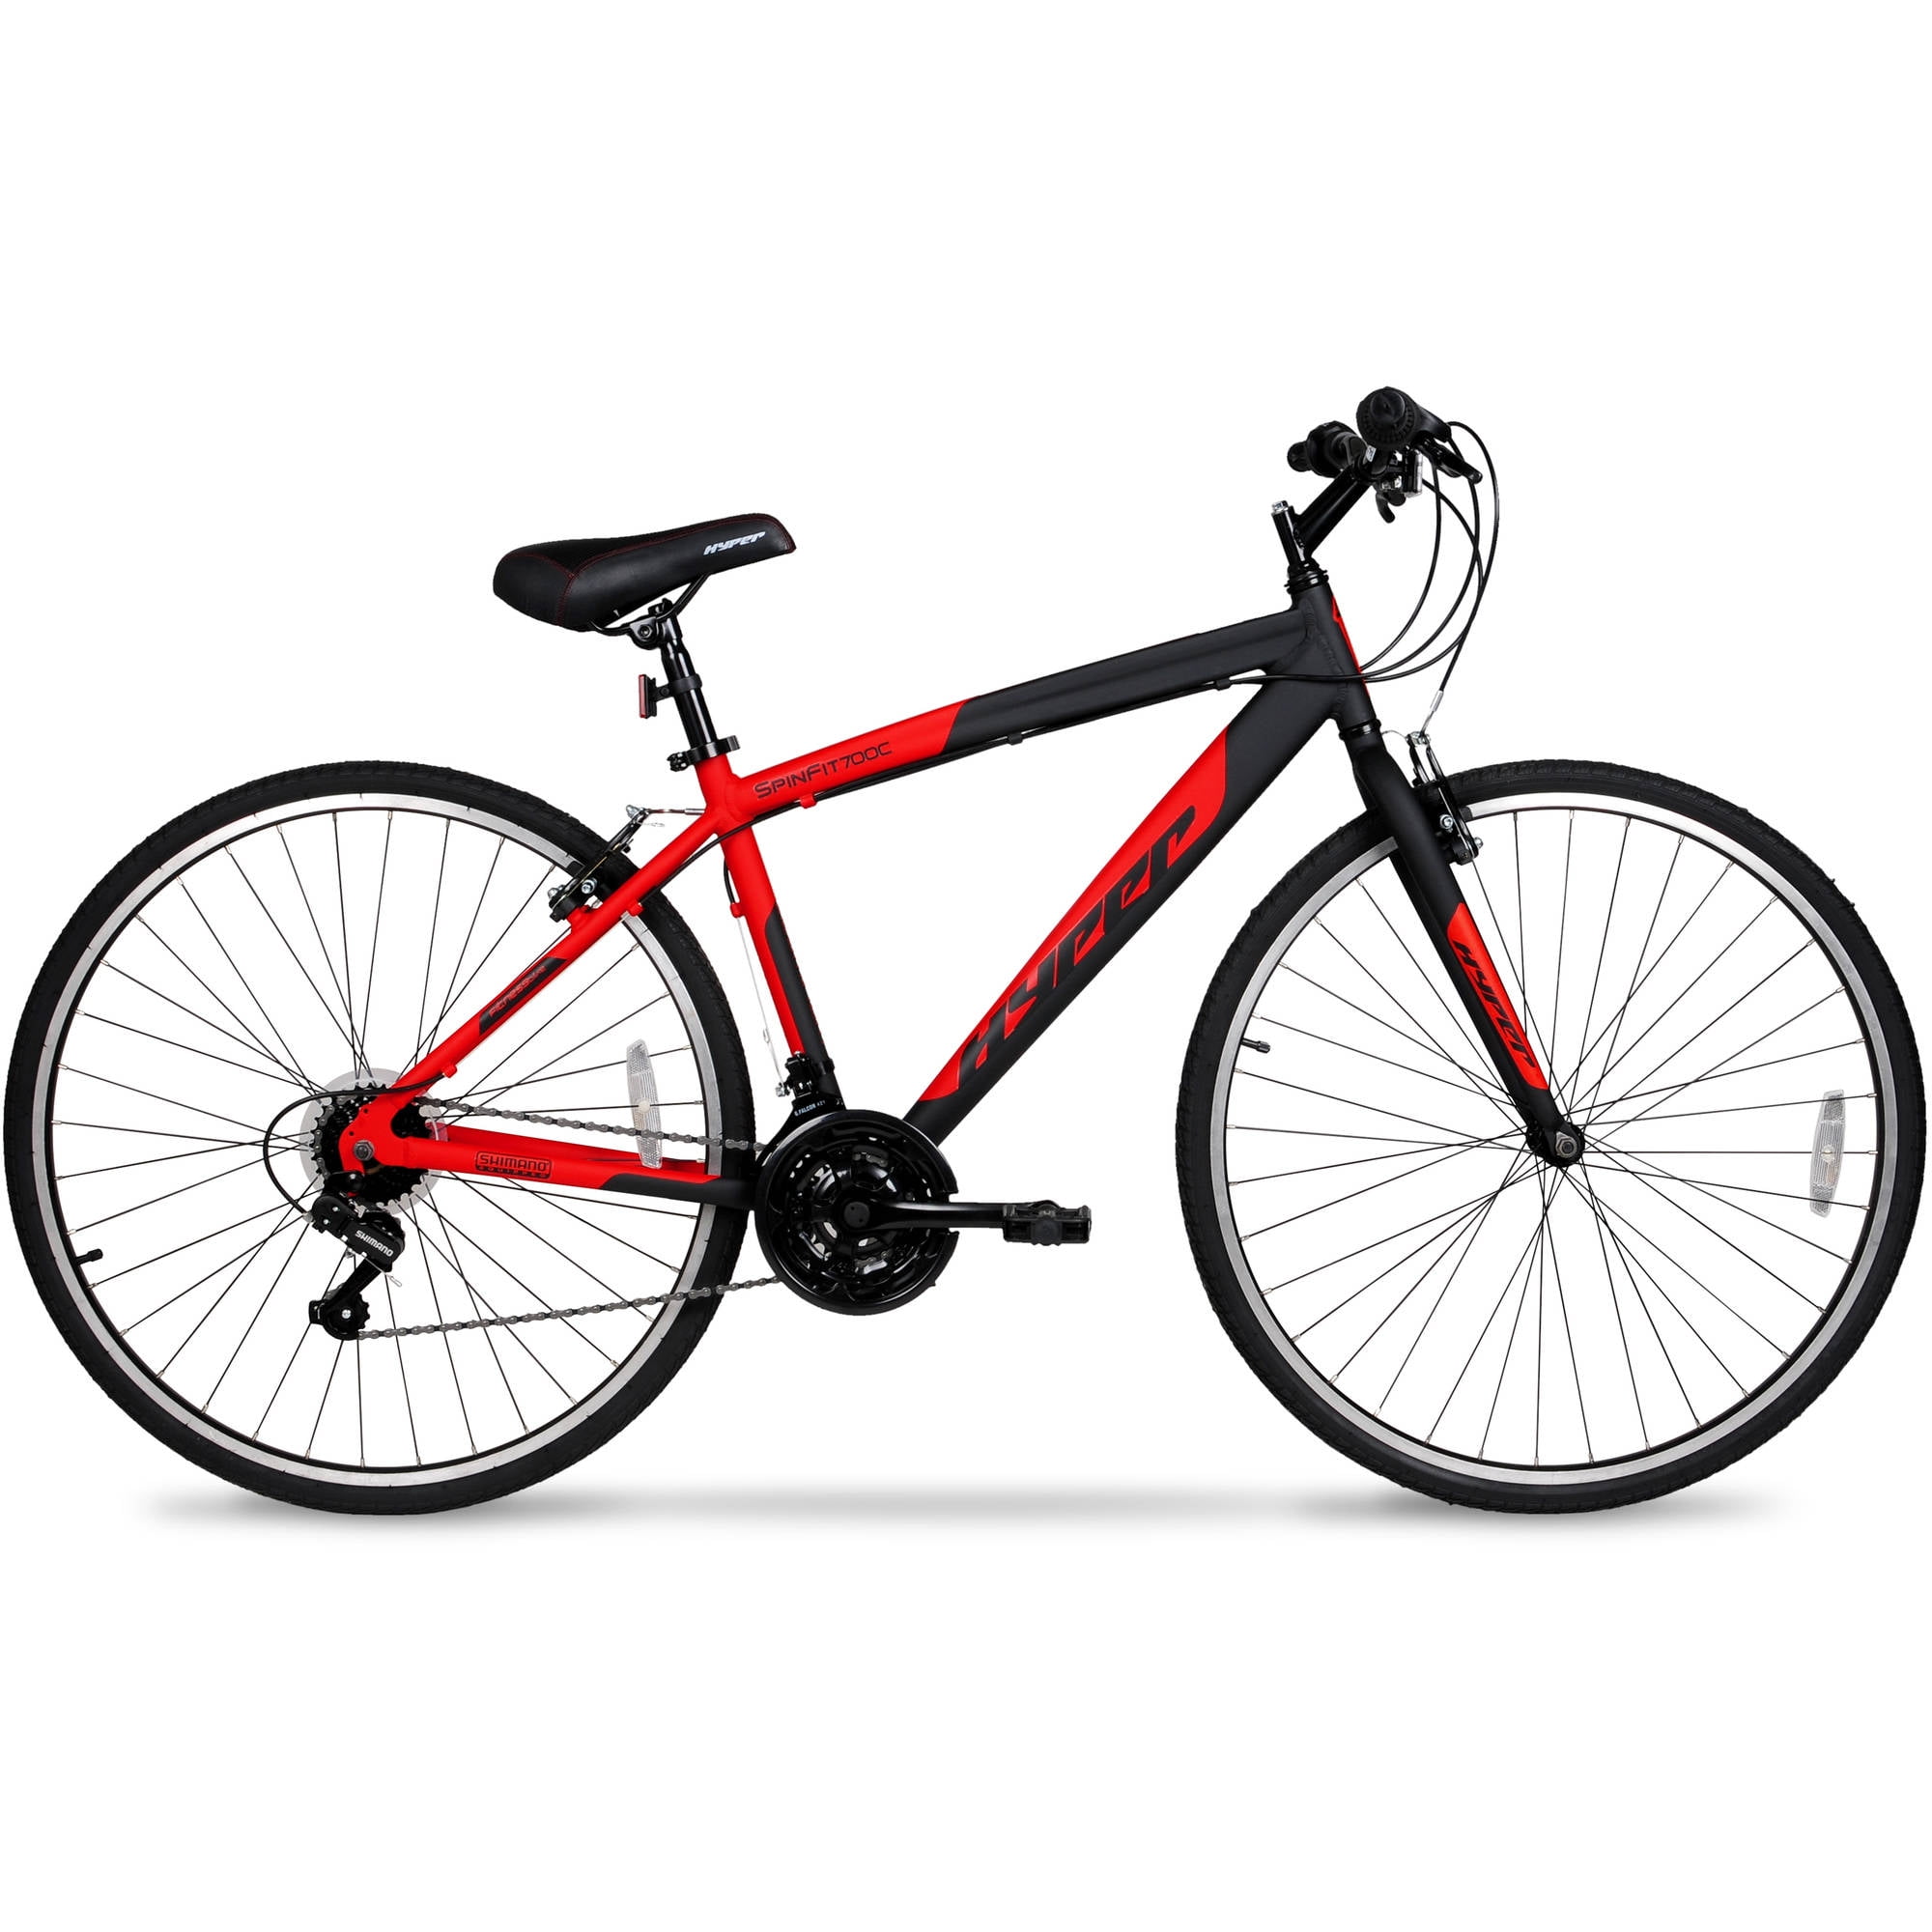 Black/Red Fast Free Shipping New Arrival Details about   Hyper 700c Men's SpinFit Hybrid Bike 